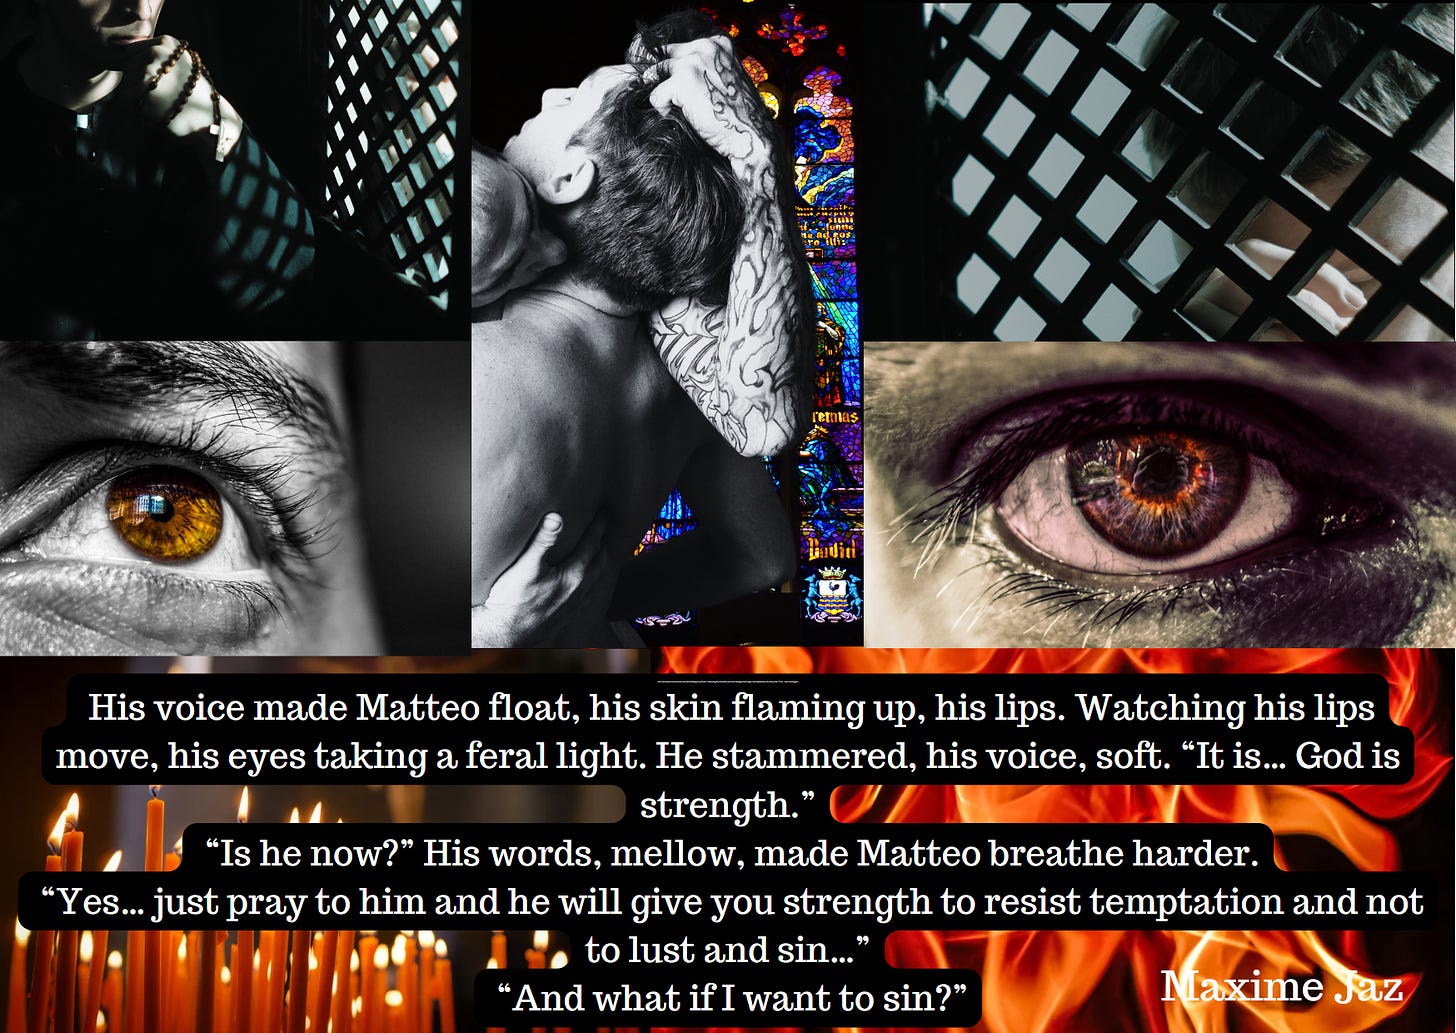 Moodboard for my WIP. Pic collage of 7 pics. On the left from top to bottom: a priest sitting in a confessional, a man's brown eyes with a worried look, orange candles burning in a church a blurred crucifix in the background. Middle pic is a man holding another man's hair in his fist, kissing/biting his neck, his other hand on his naked back. There's a stained-glass church window in the background.  Right pics, top to bottom: a man in a confessional, a man's eyes filled with flames, flames.  Maxime Jaz as caption.  Quote: His voice made Matteo float, his skin flaming up, his lips. Watching his lips move, his eyes taking a feral light. He stammered, his voice, soft. “It is… God is strength.”  “Is he now?” His words, mellow, made Matteo breathe harder.  “Yes… just pray to him and he will give you strength to resist temptation and not to lust and sin…”  “And what if I want to sin?”